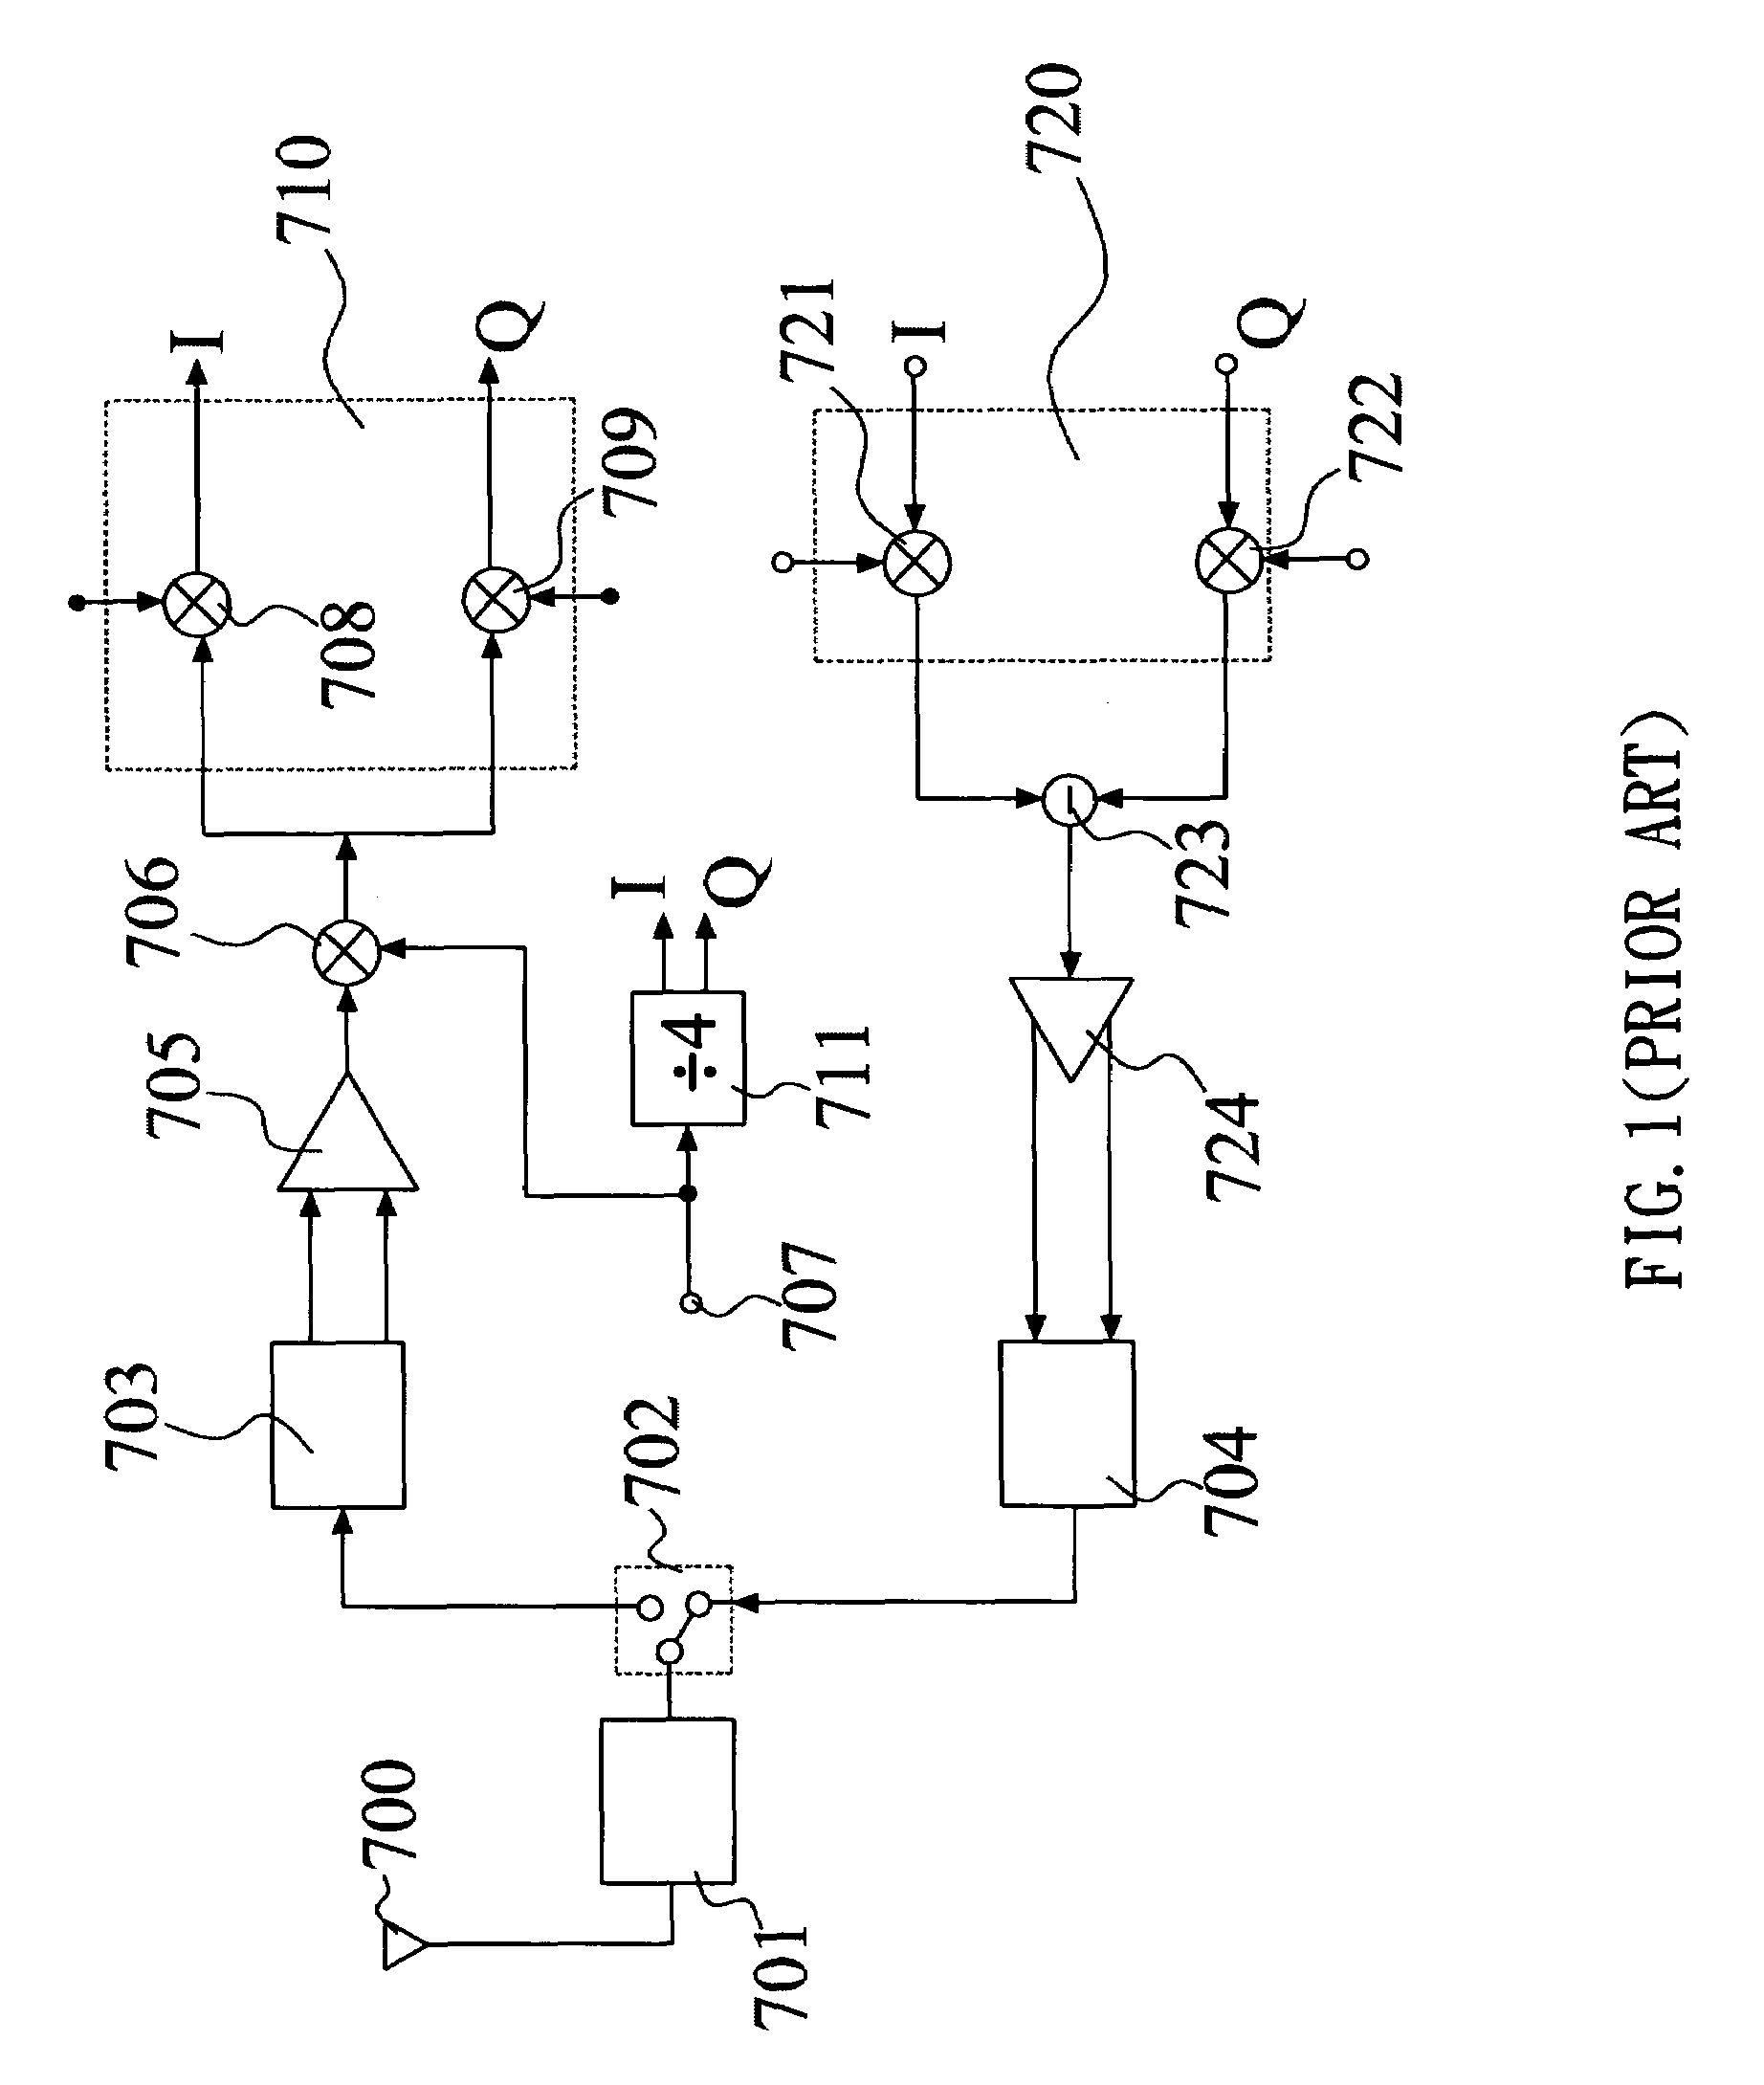 Dual band transceiver architecture for wireless communication